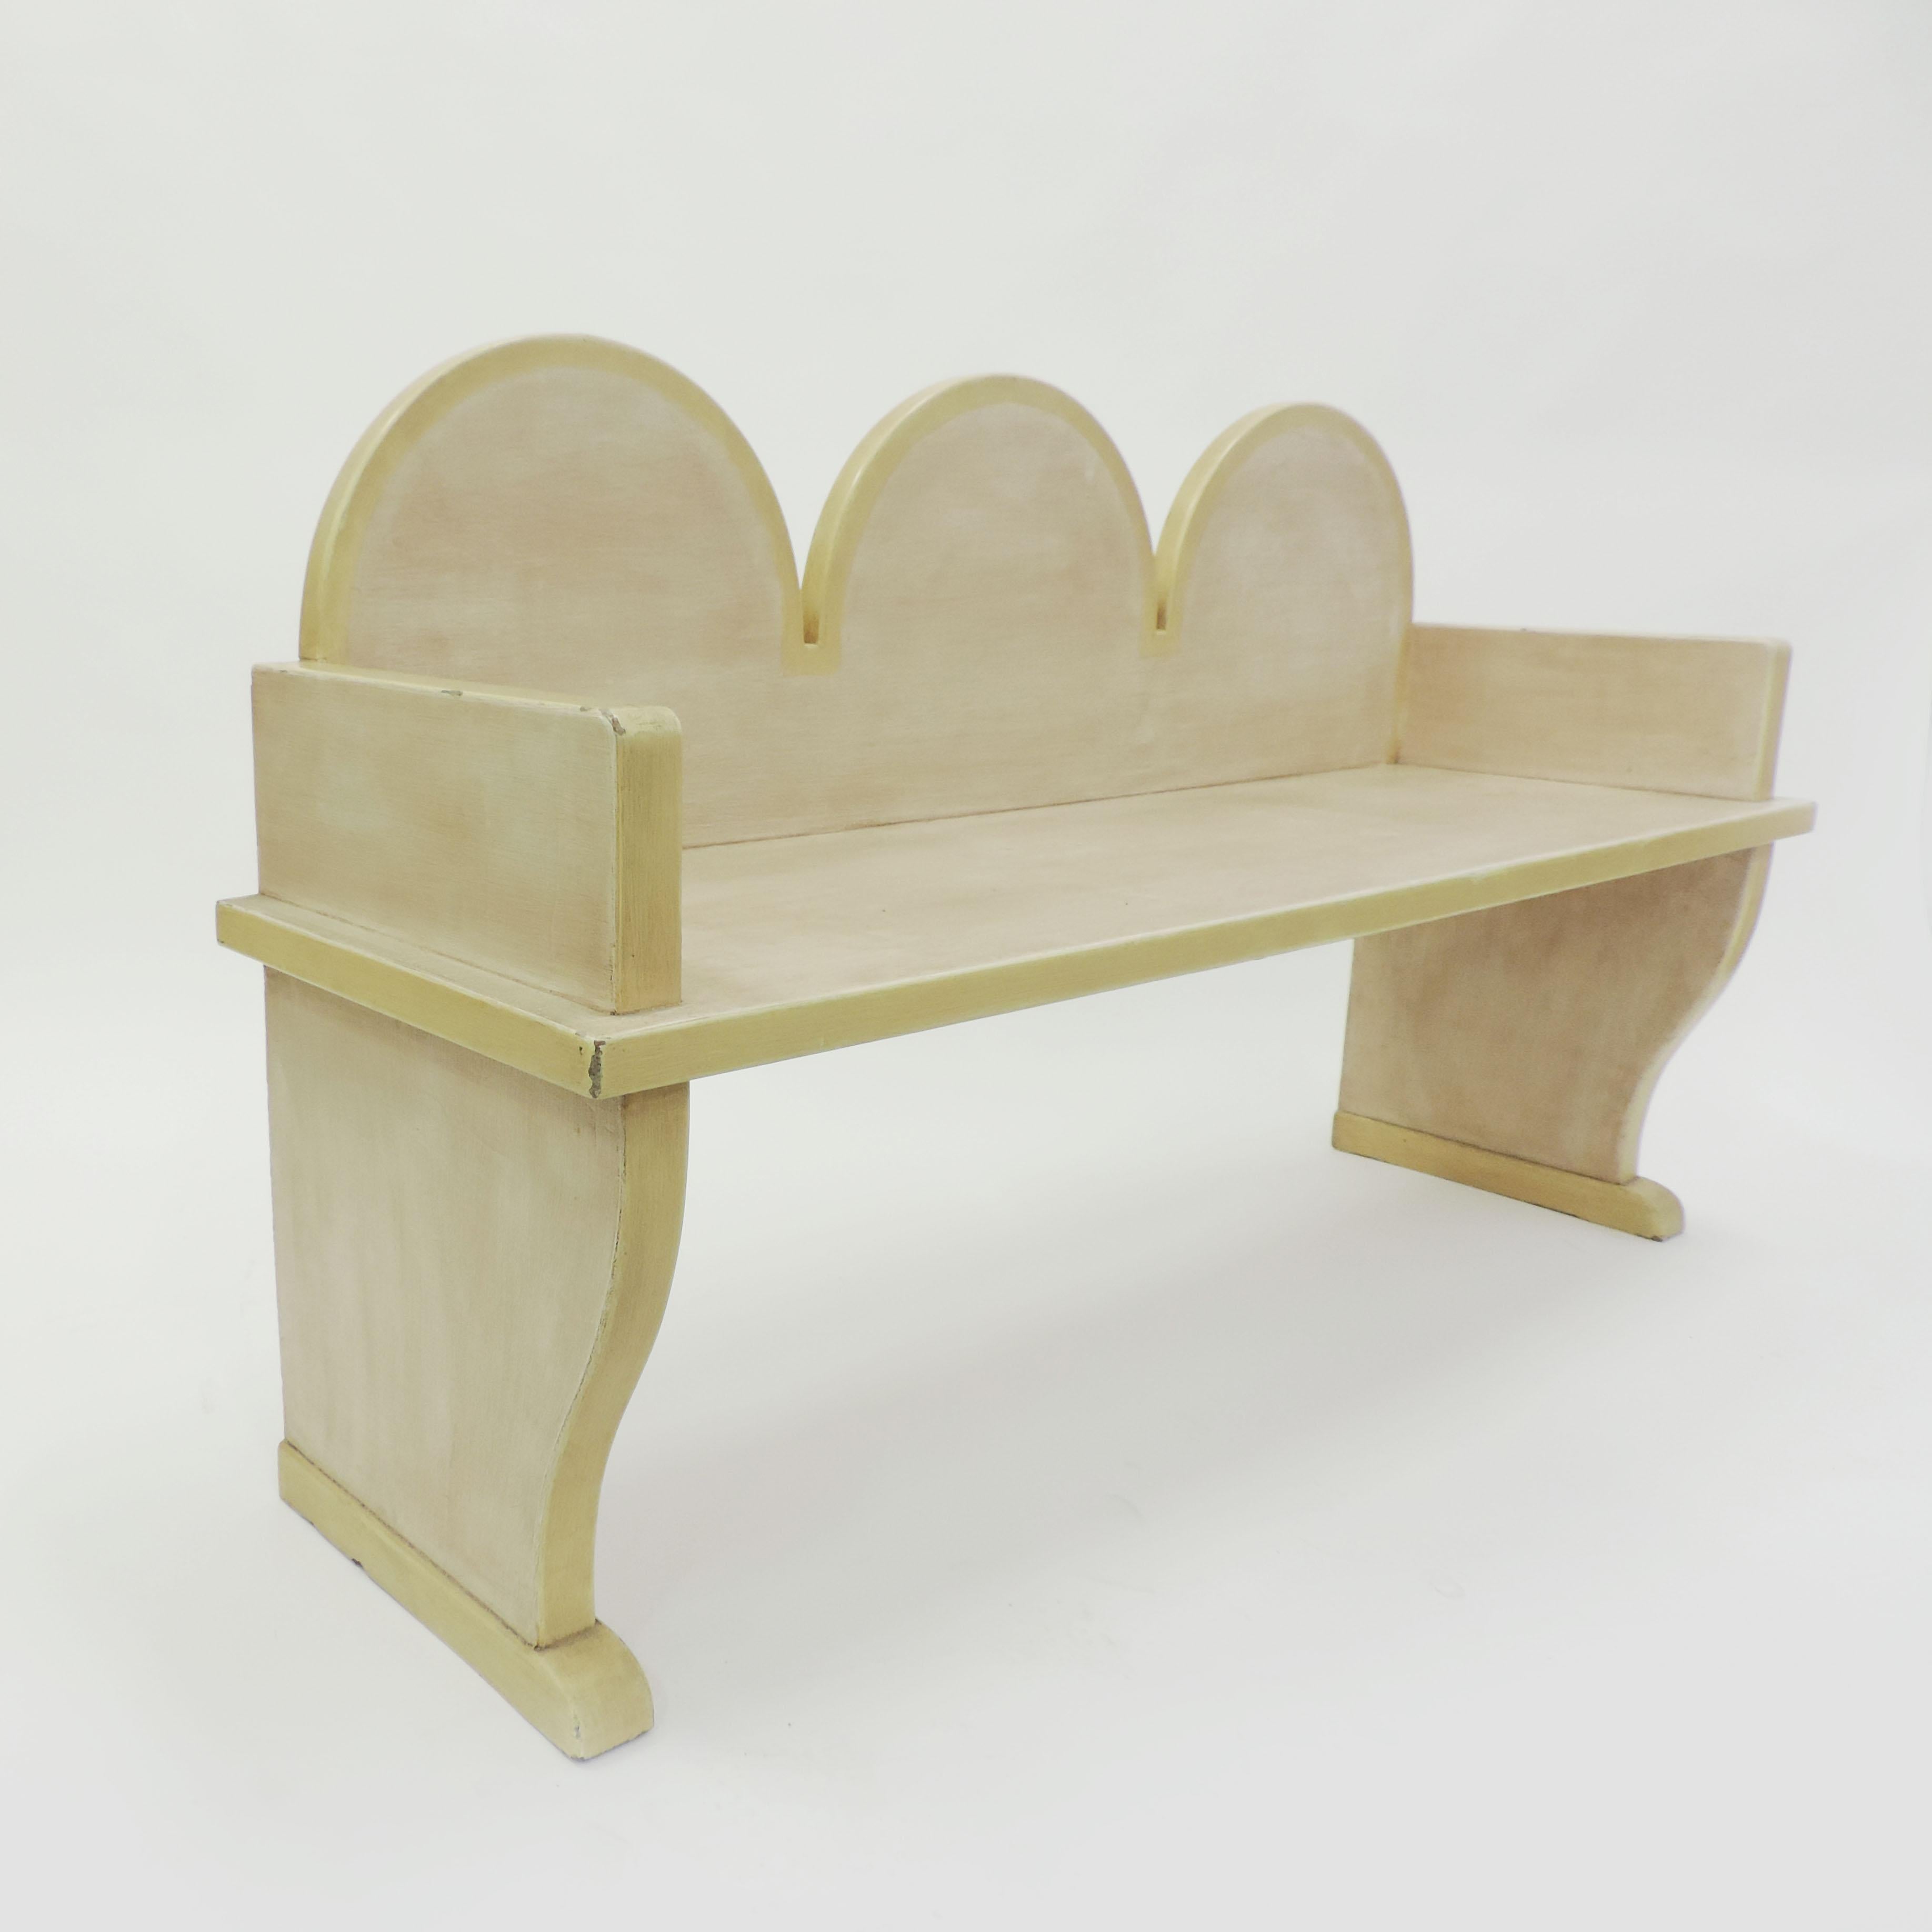 Italian 'Futurist' bench, 1920s
Lightly painted in off-white and yellow borders.